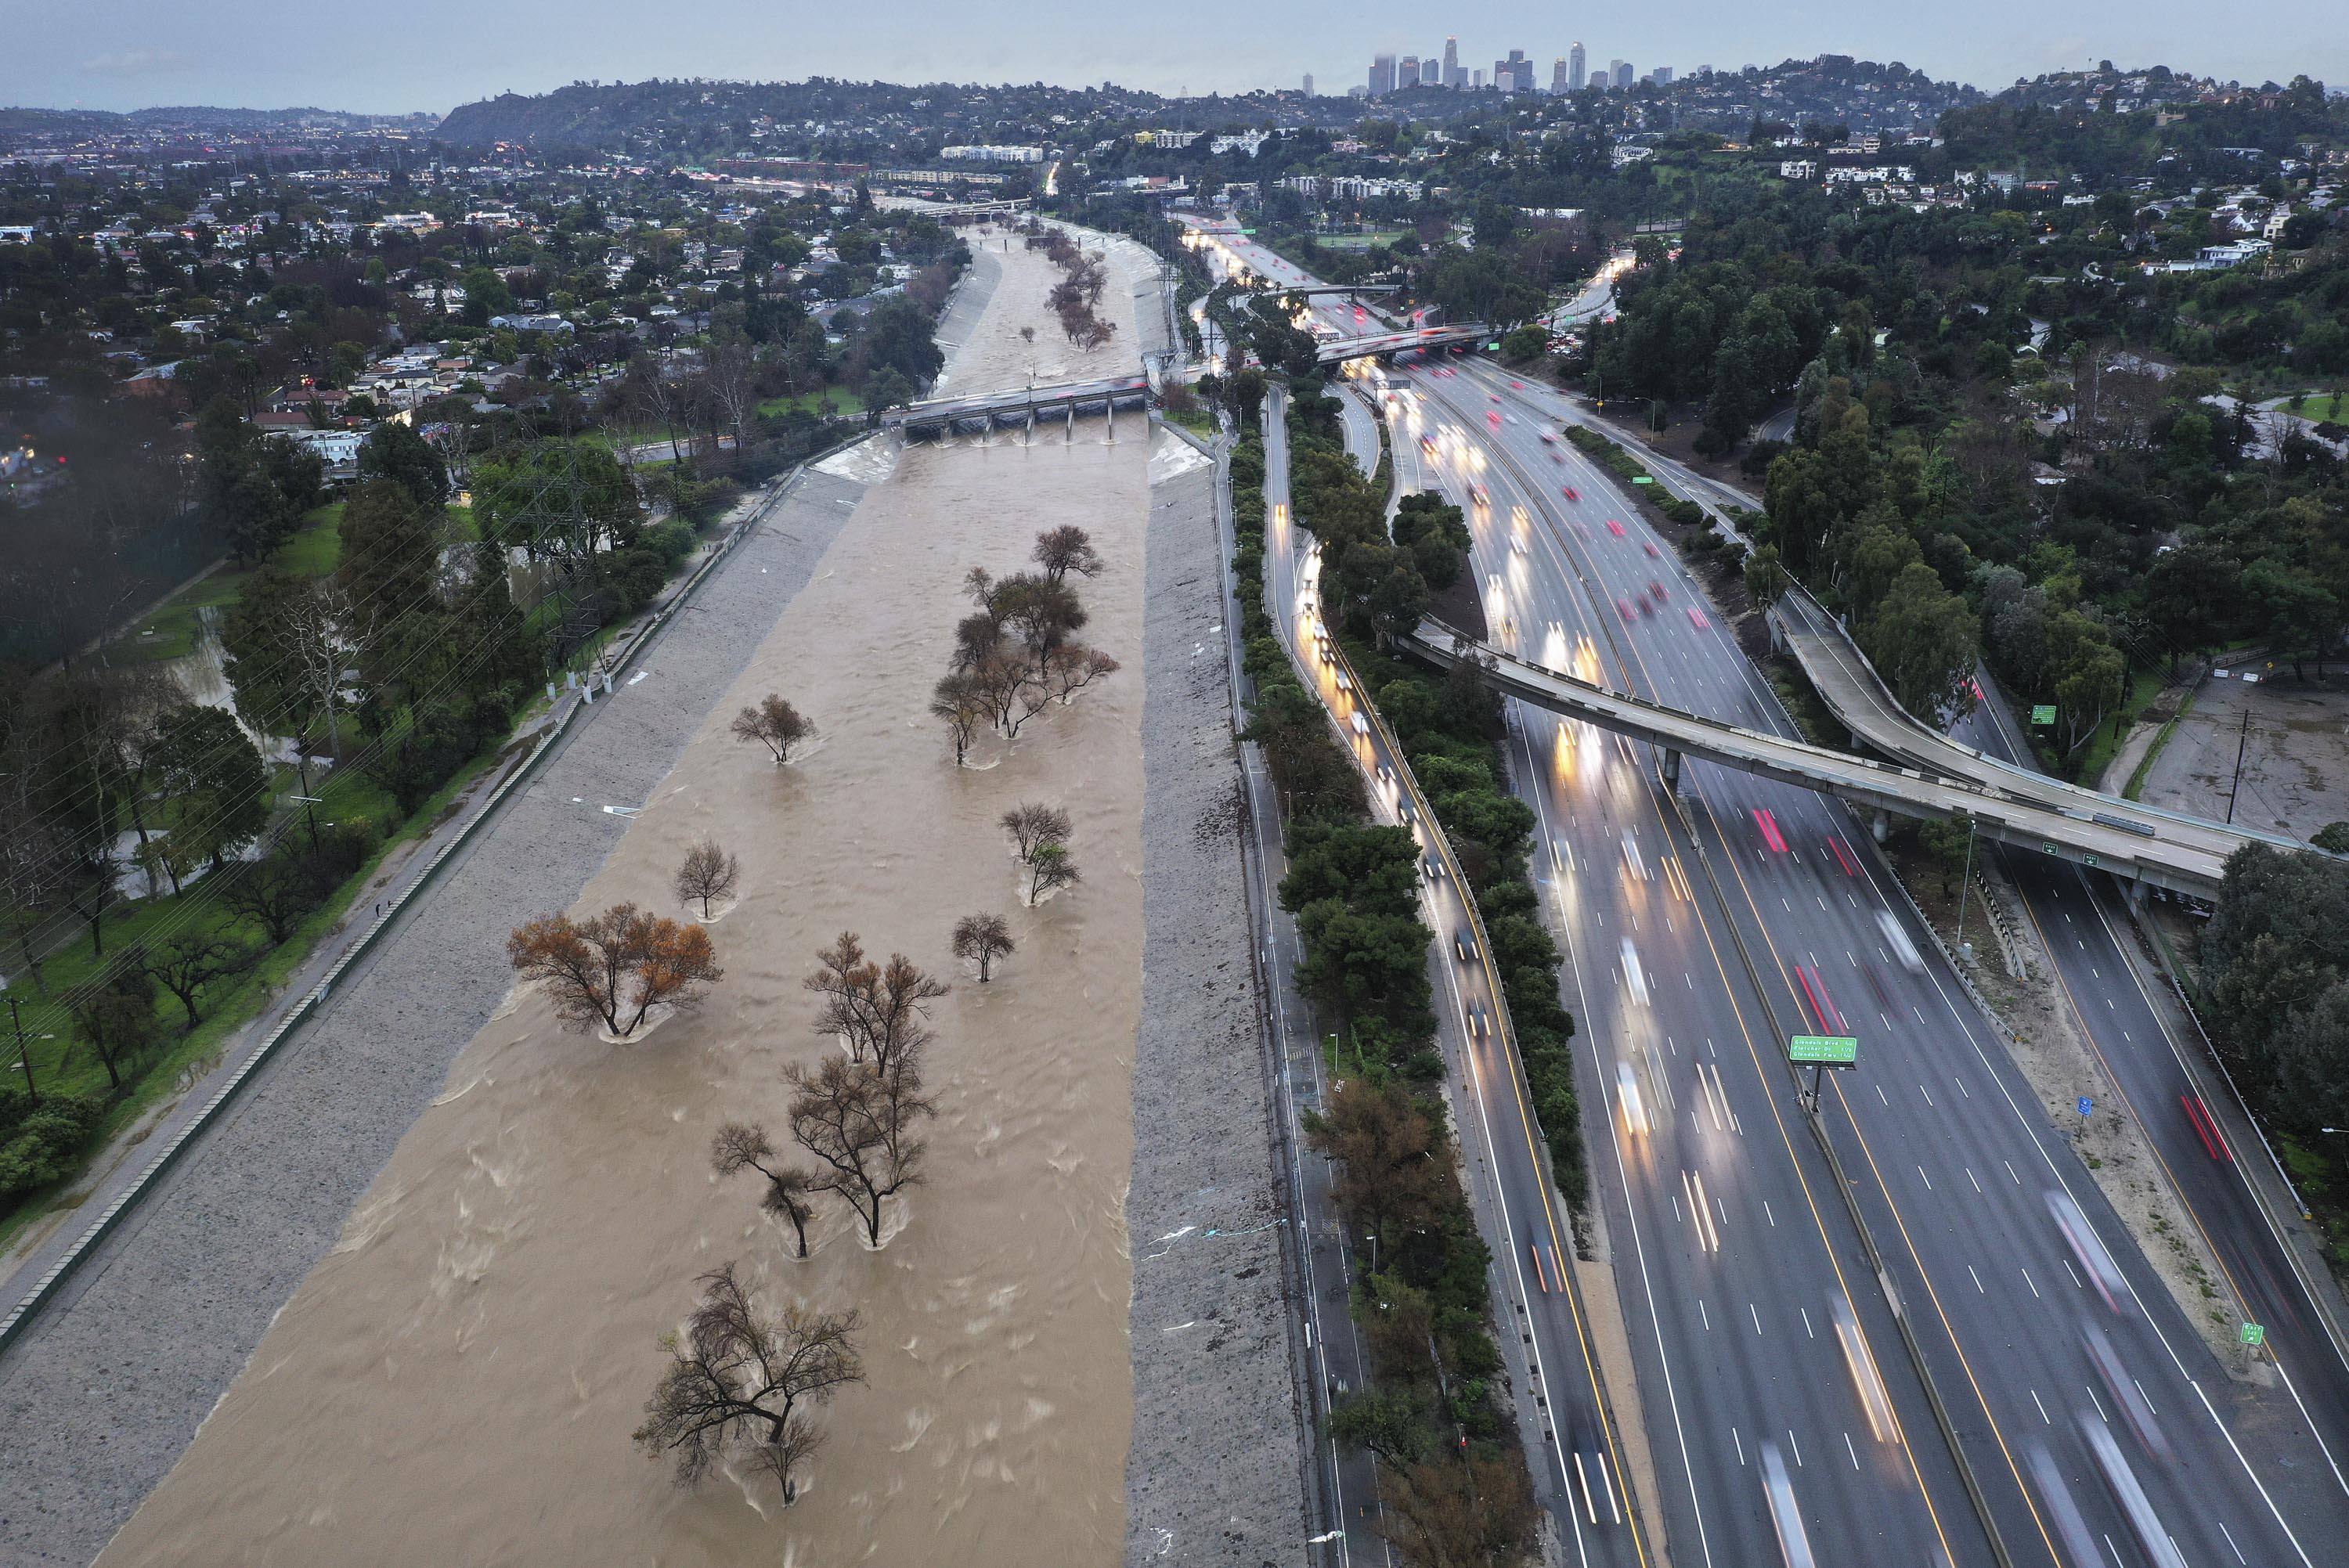 An aerial view shows the Los Angeles River swollen by storm runoff in Los Angeles, California, on February 5. 